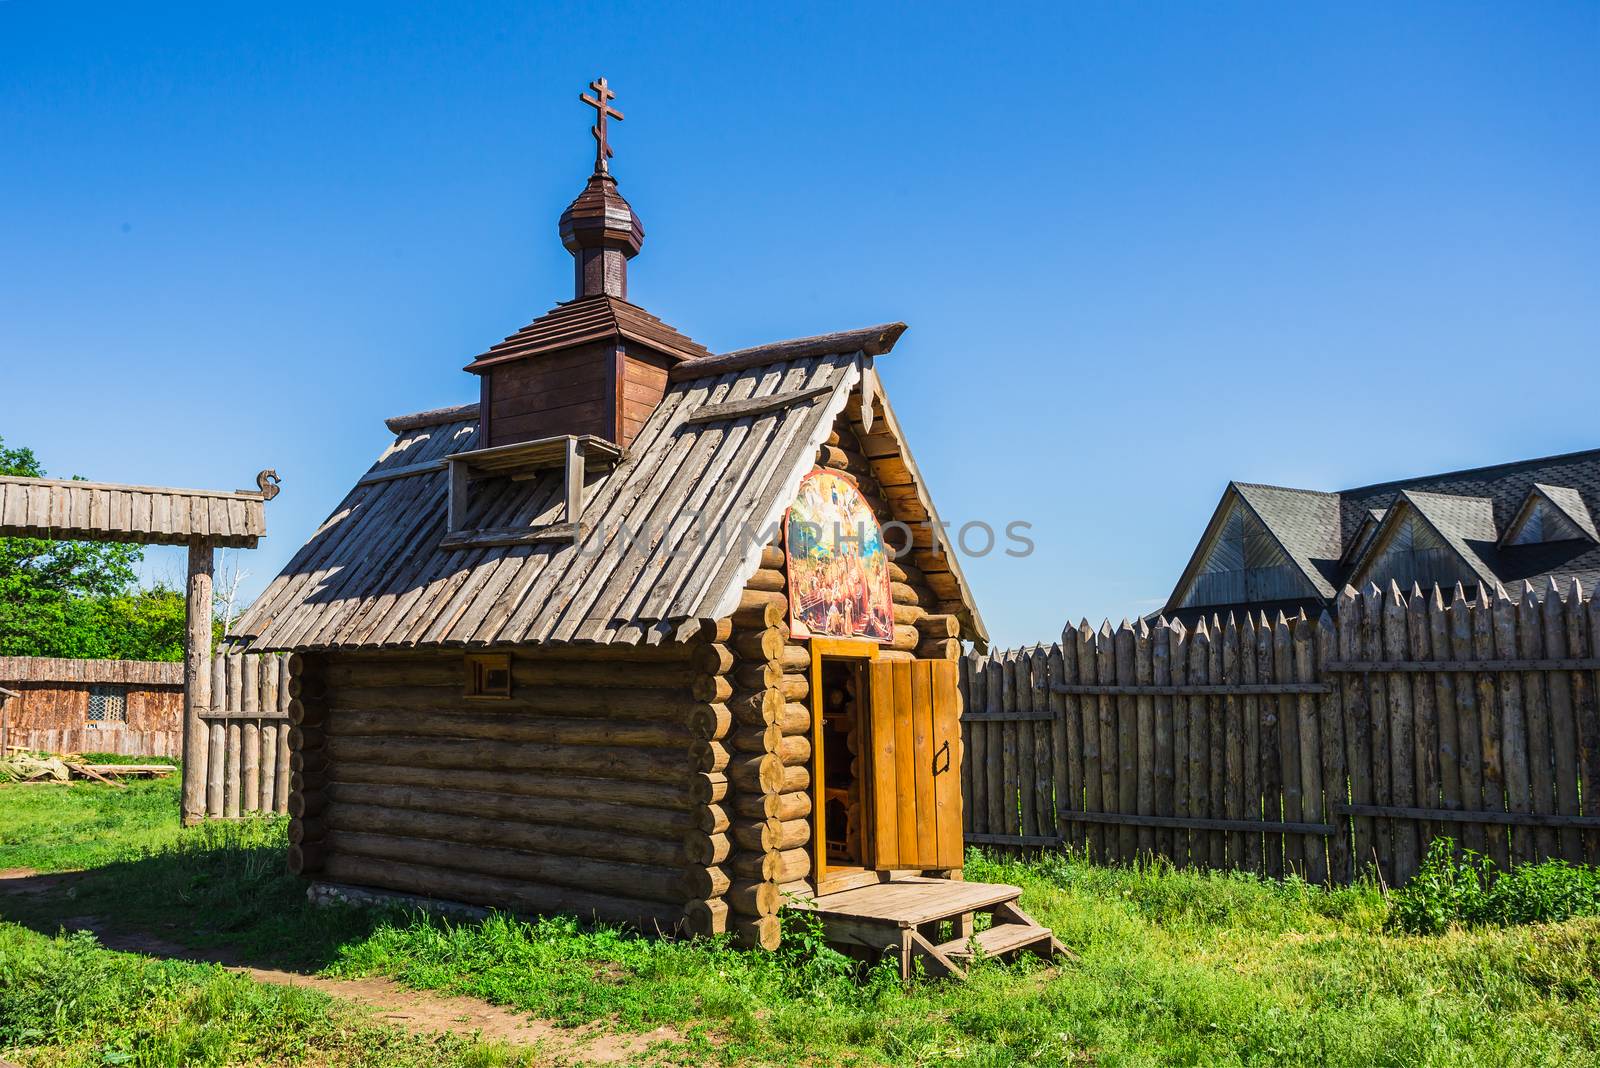 The wooden house in a countryside in Russia